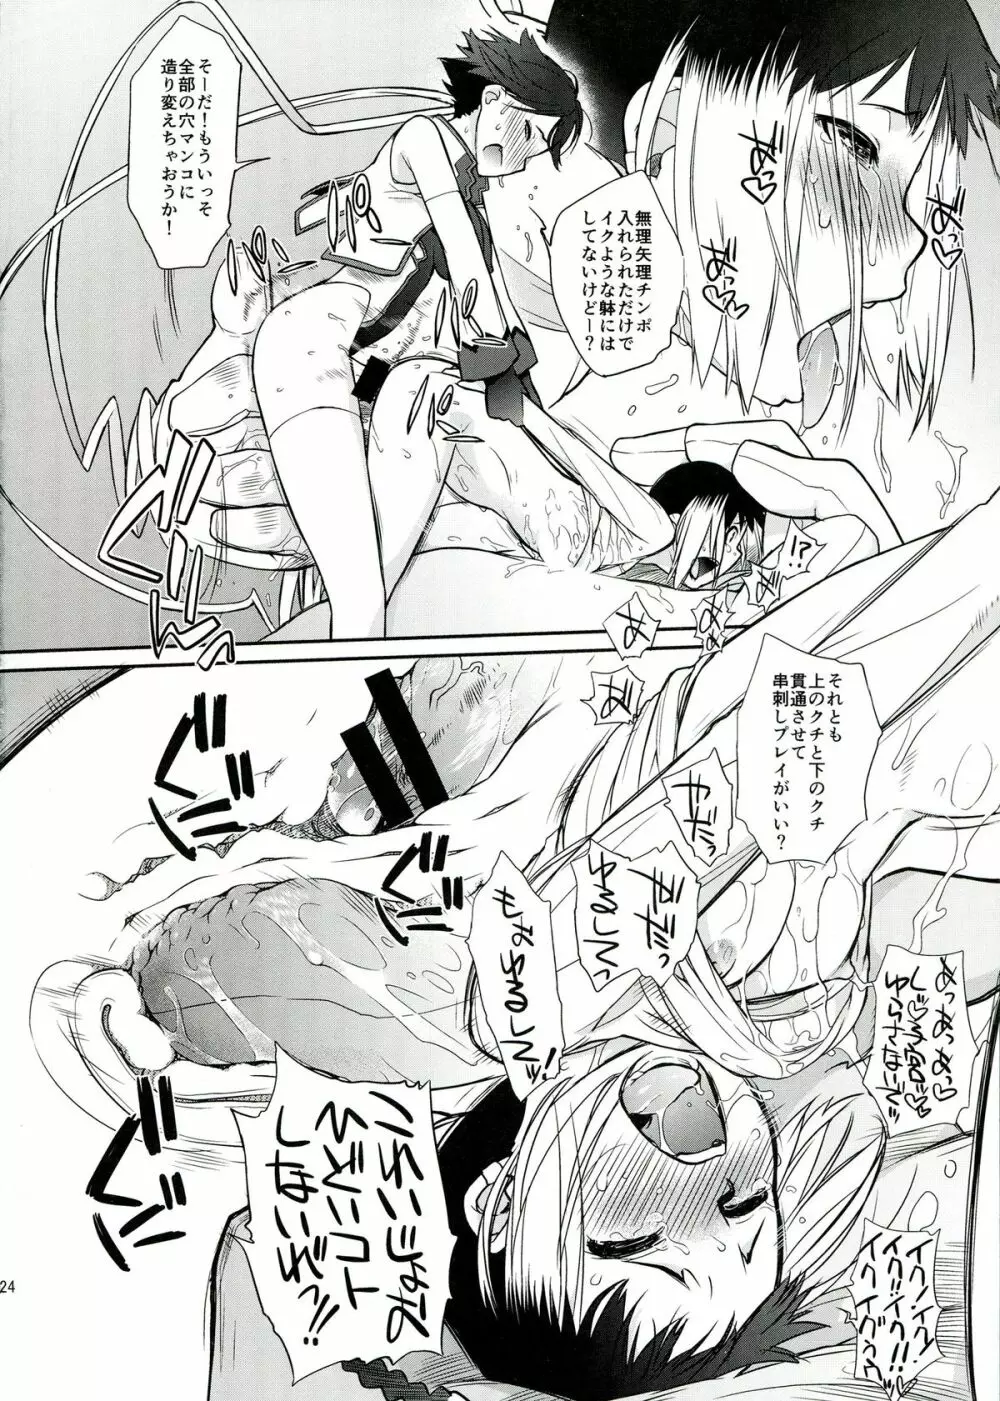 3ANGELS SHORT Full Blossom #01b Linearis Page.24